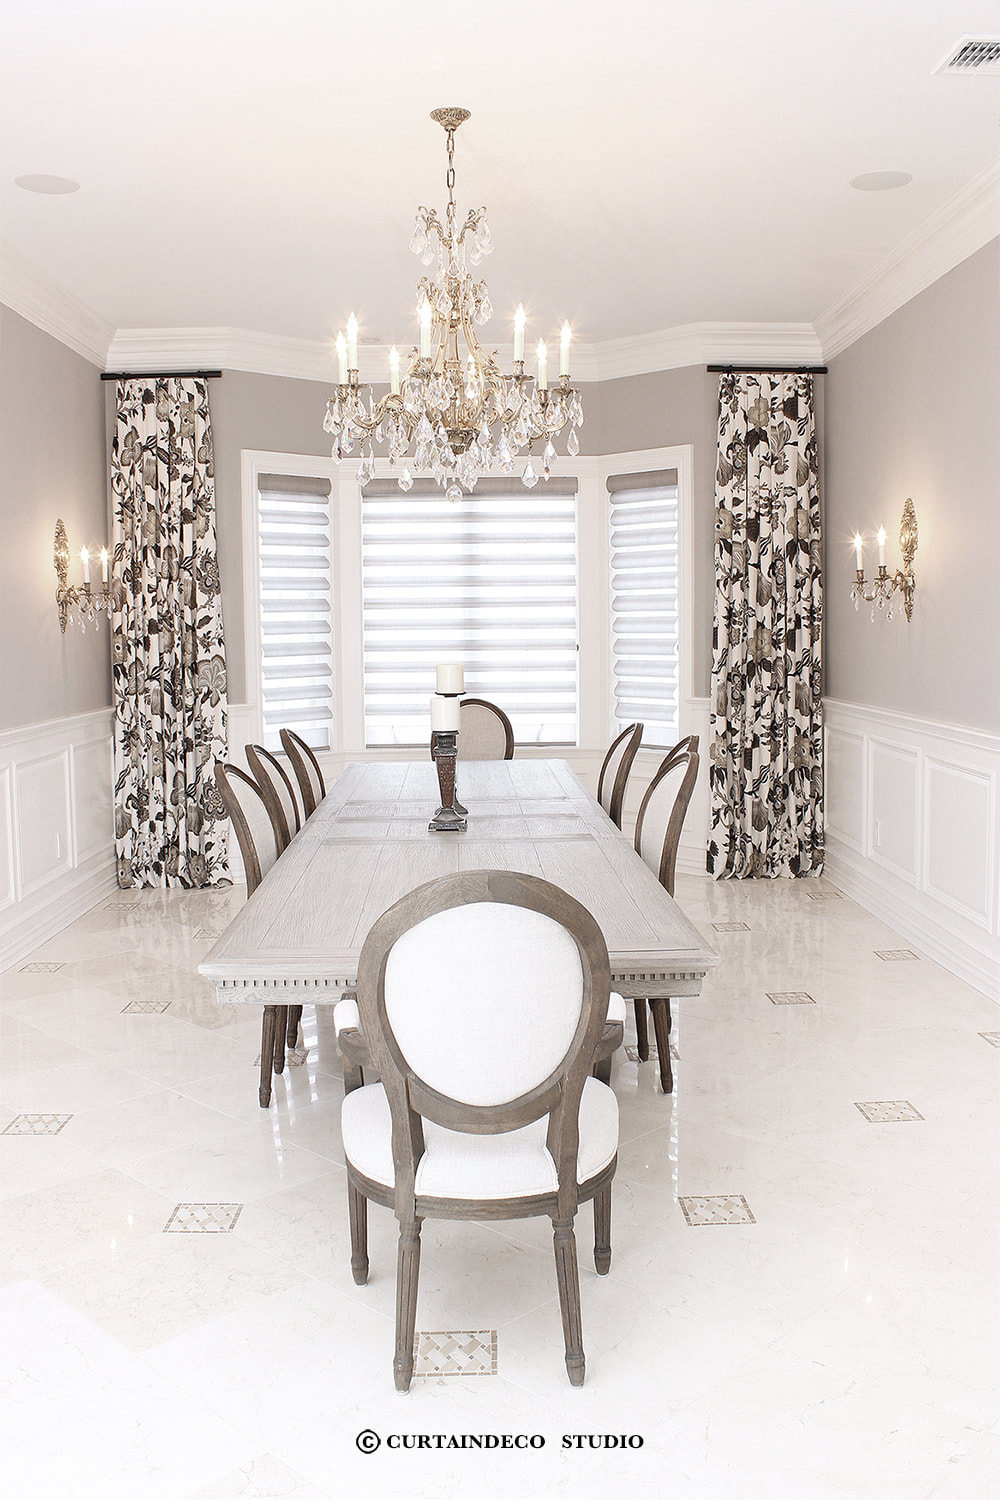 Elegant formal dining room in Demarest, NJ, featuring luxurious patterned curtains flanking a large window with layered shades, complemented by a classic chandelier and refined decor.